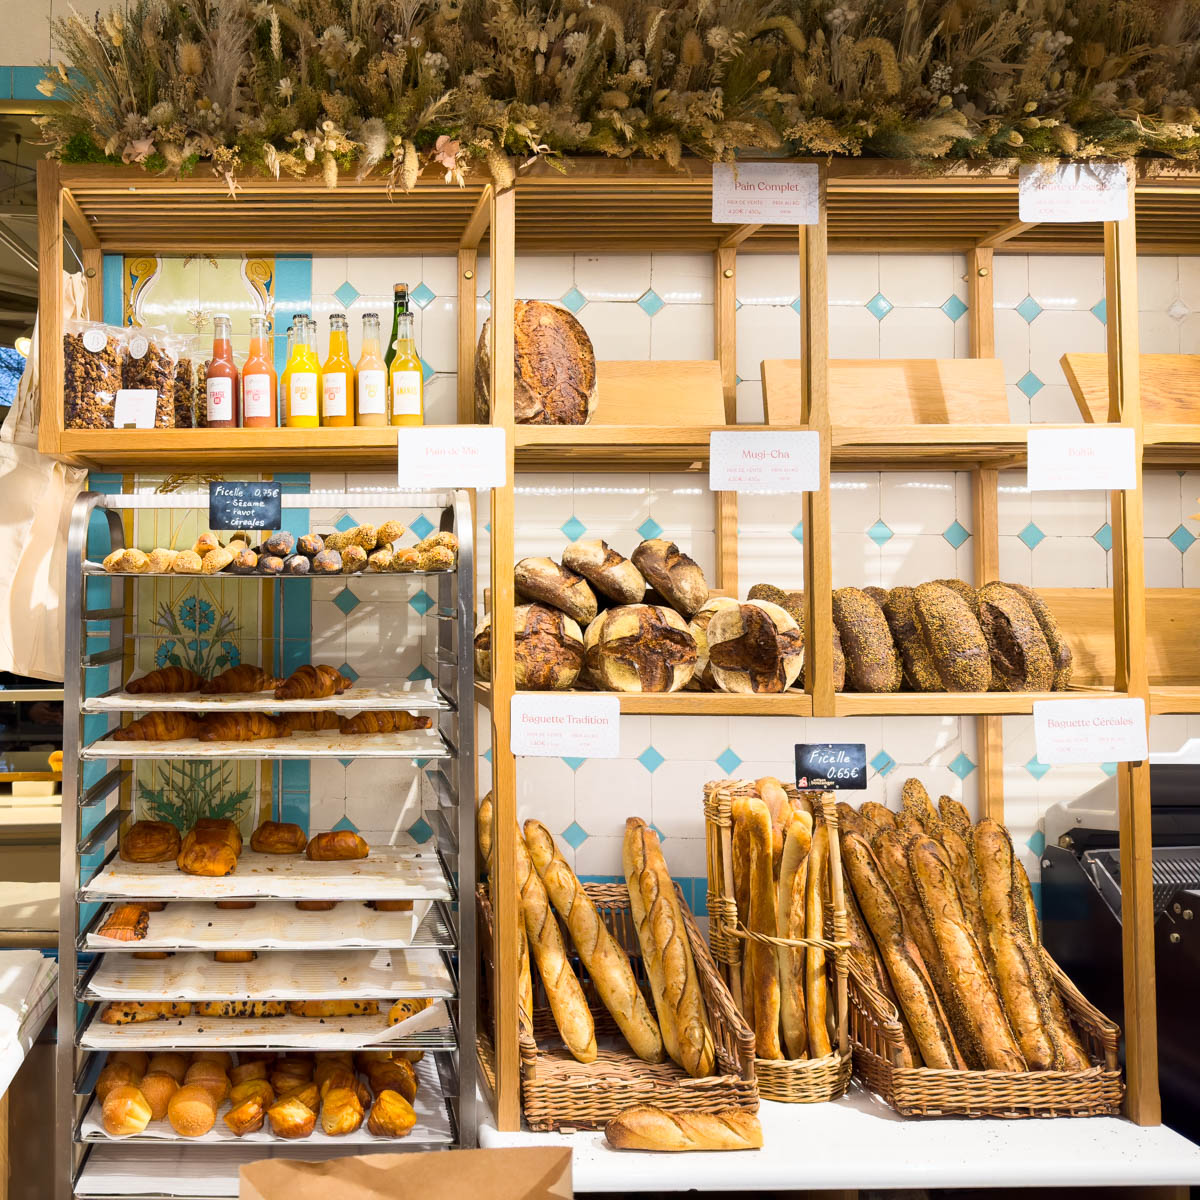 A bakery display of fresh baked breads.